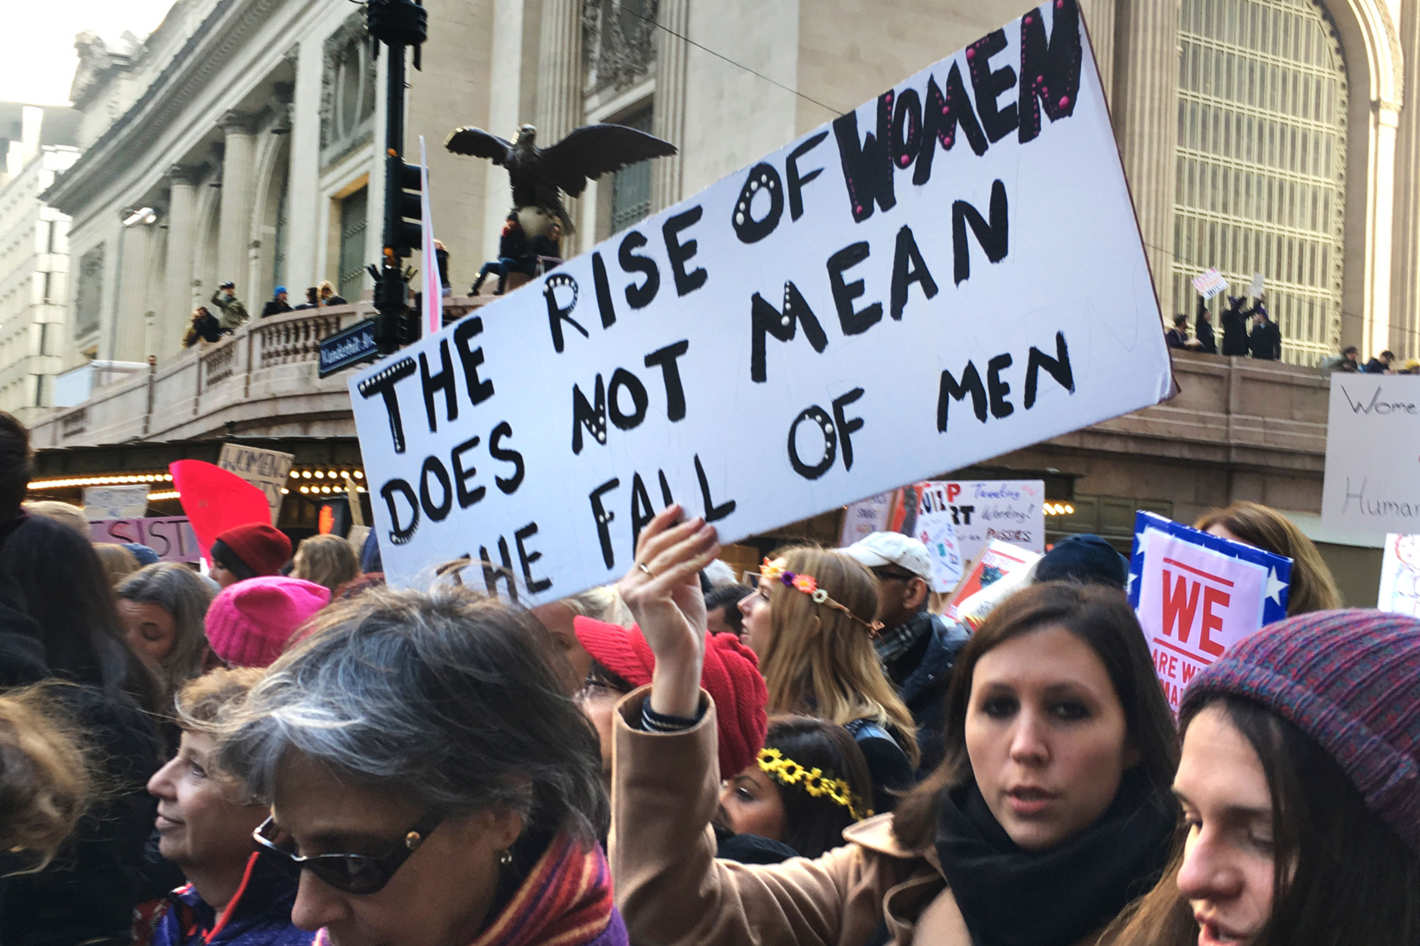 The Rise Of Women Does Not Mean The Fall Of Men